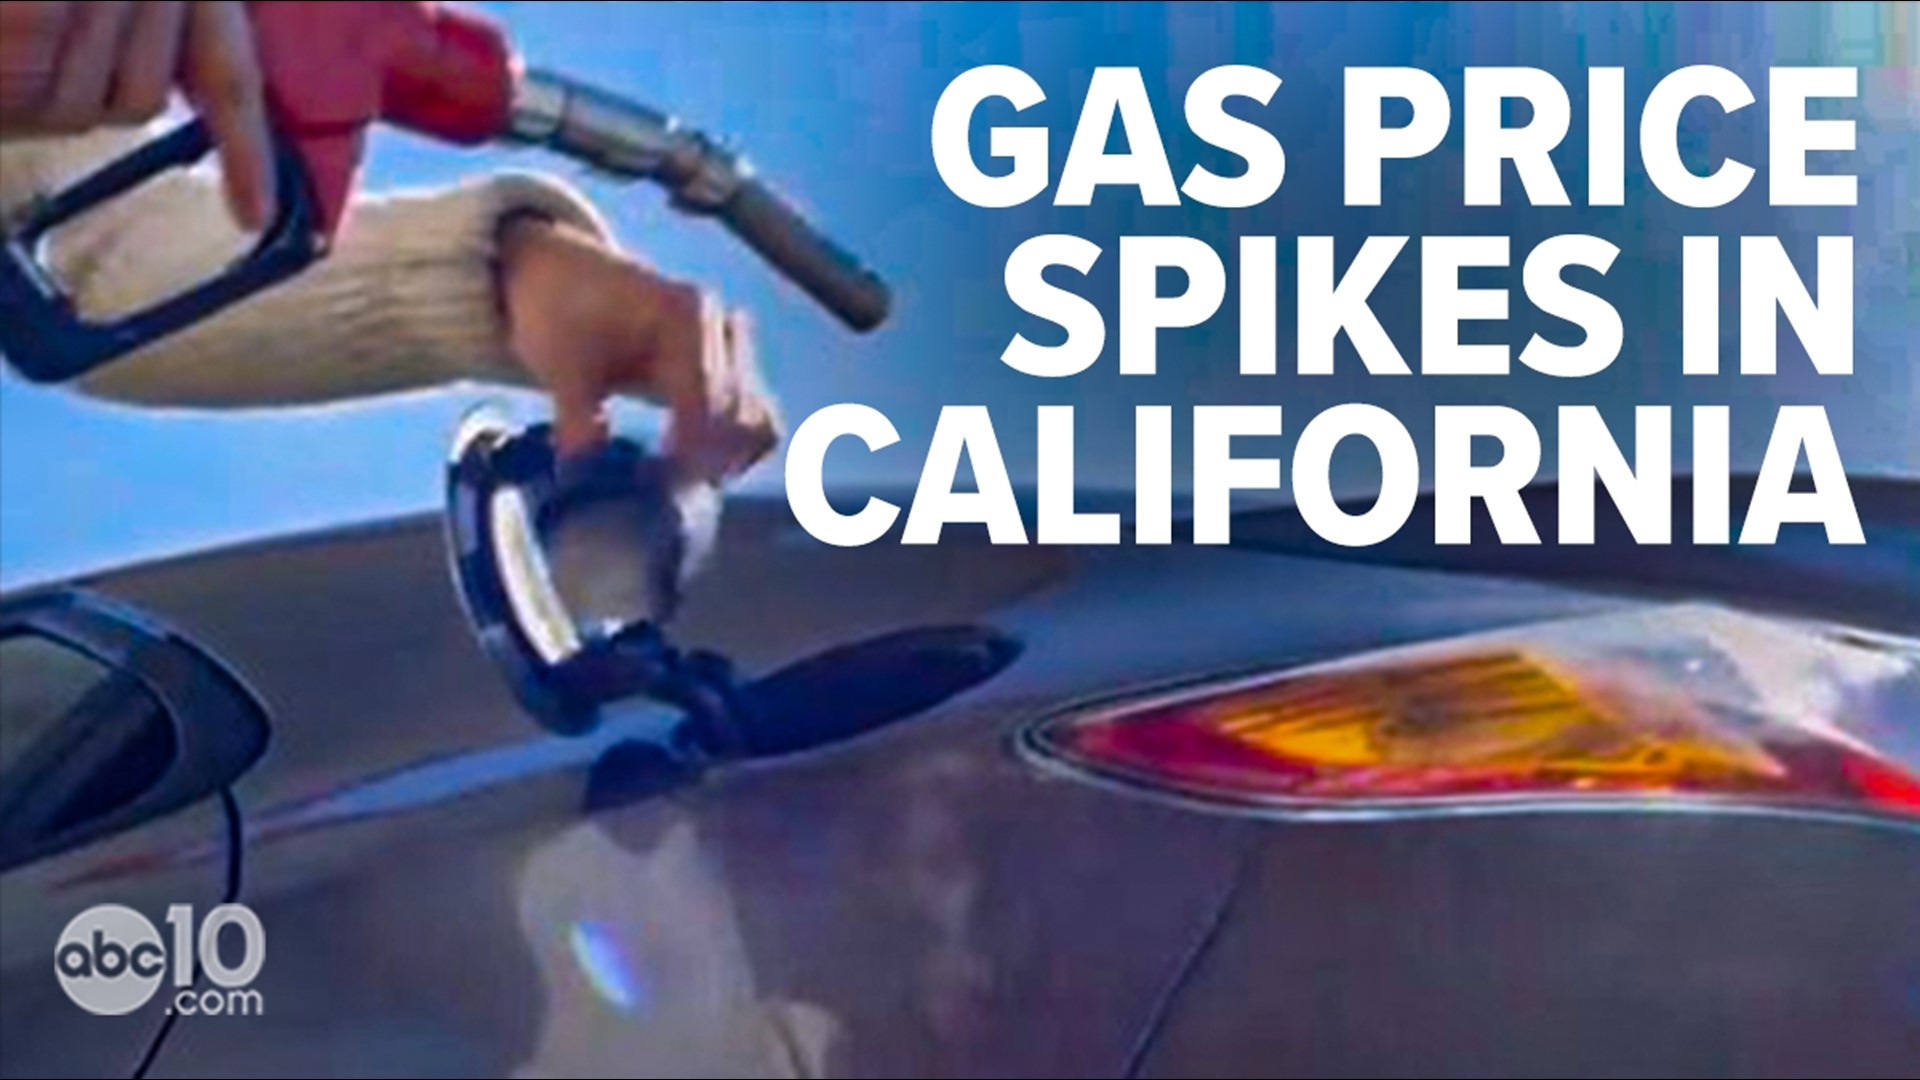 Oil companies in California suspected of price gouging during the gas hike are now coming under scrutiny by Gov. Newsom, but how?